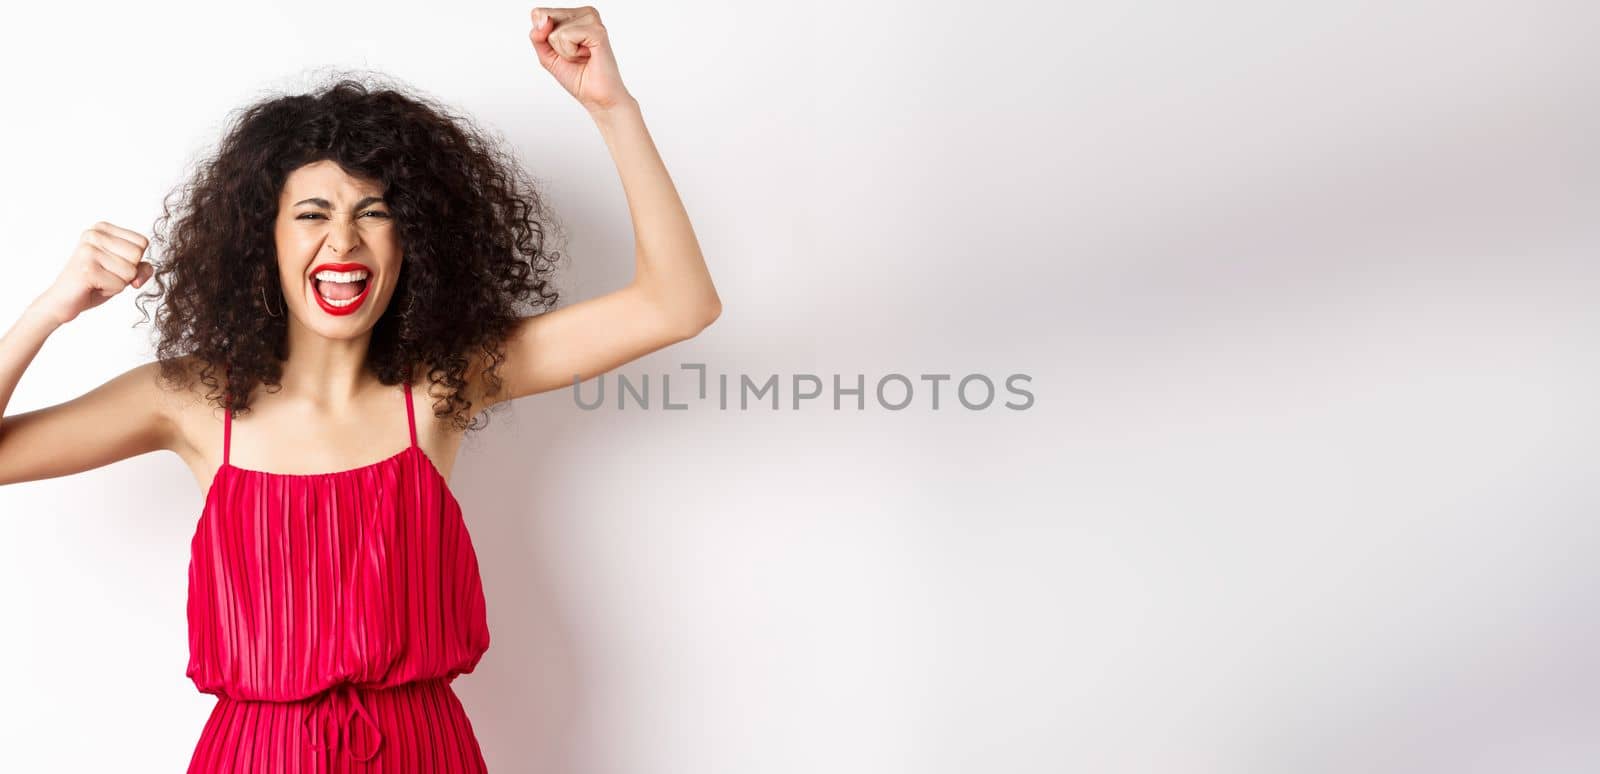 Cheerful emotive woman with curly hair, red dress, raising hands up and chanting, rooting for team, shouting wanting to win, standing on white background.